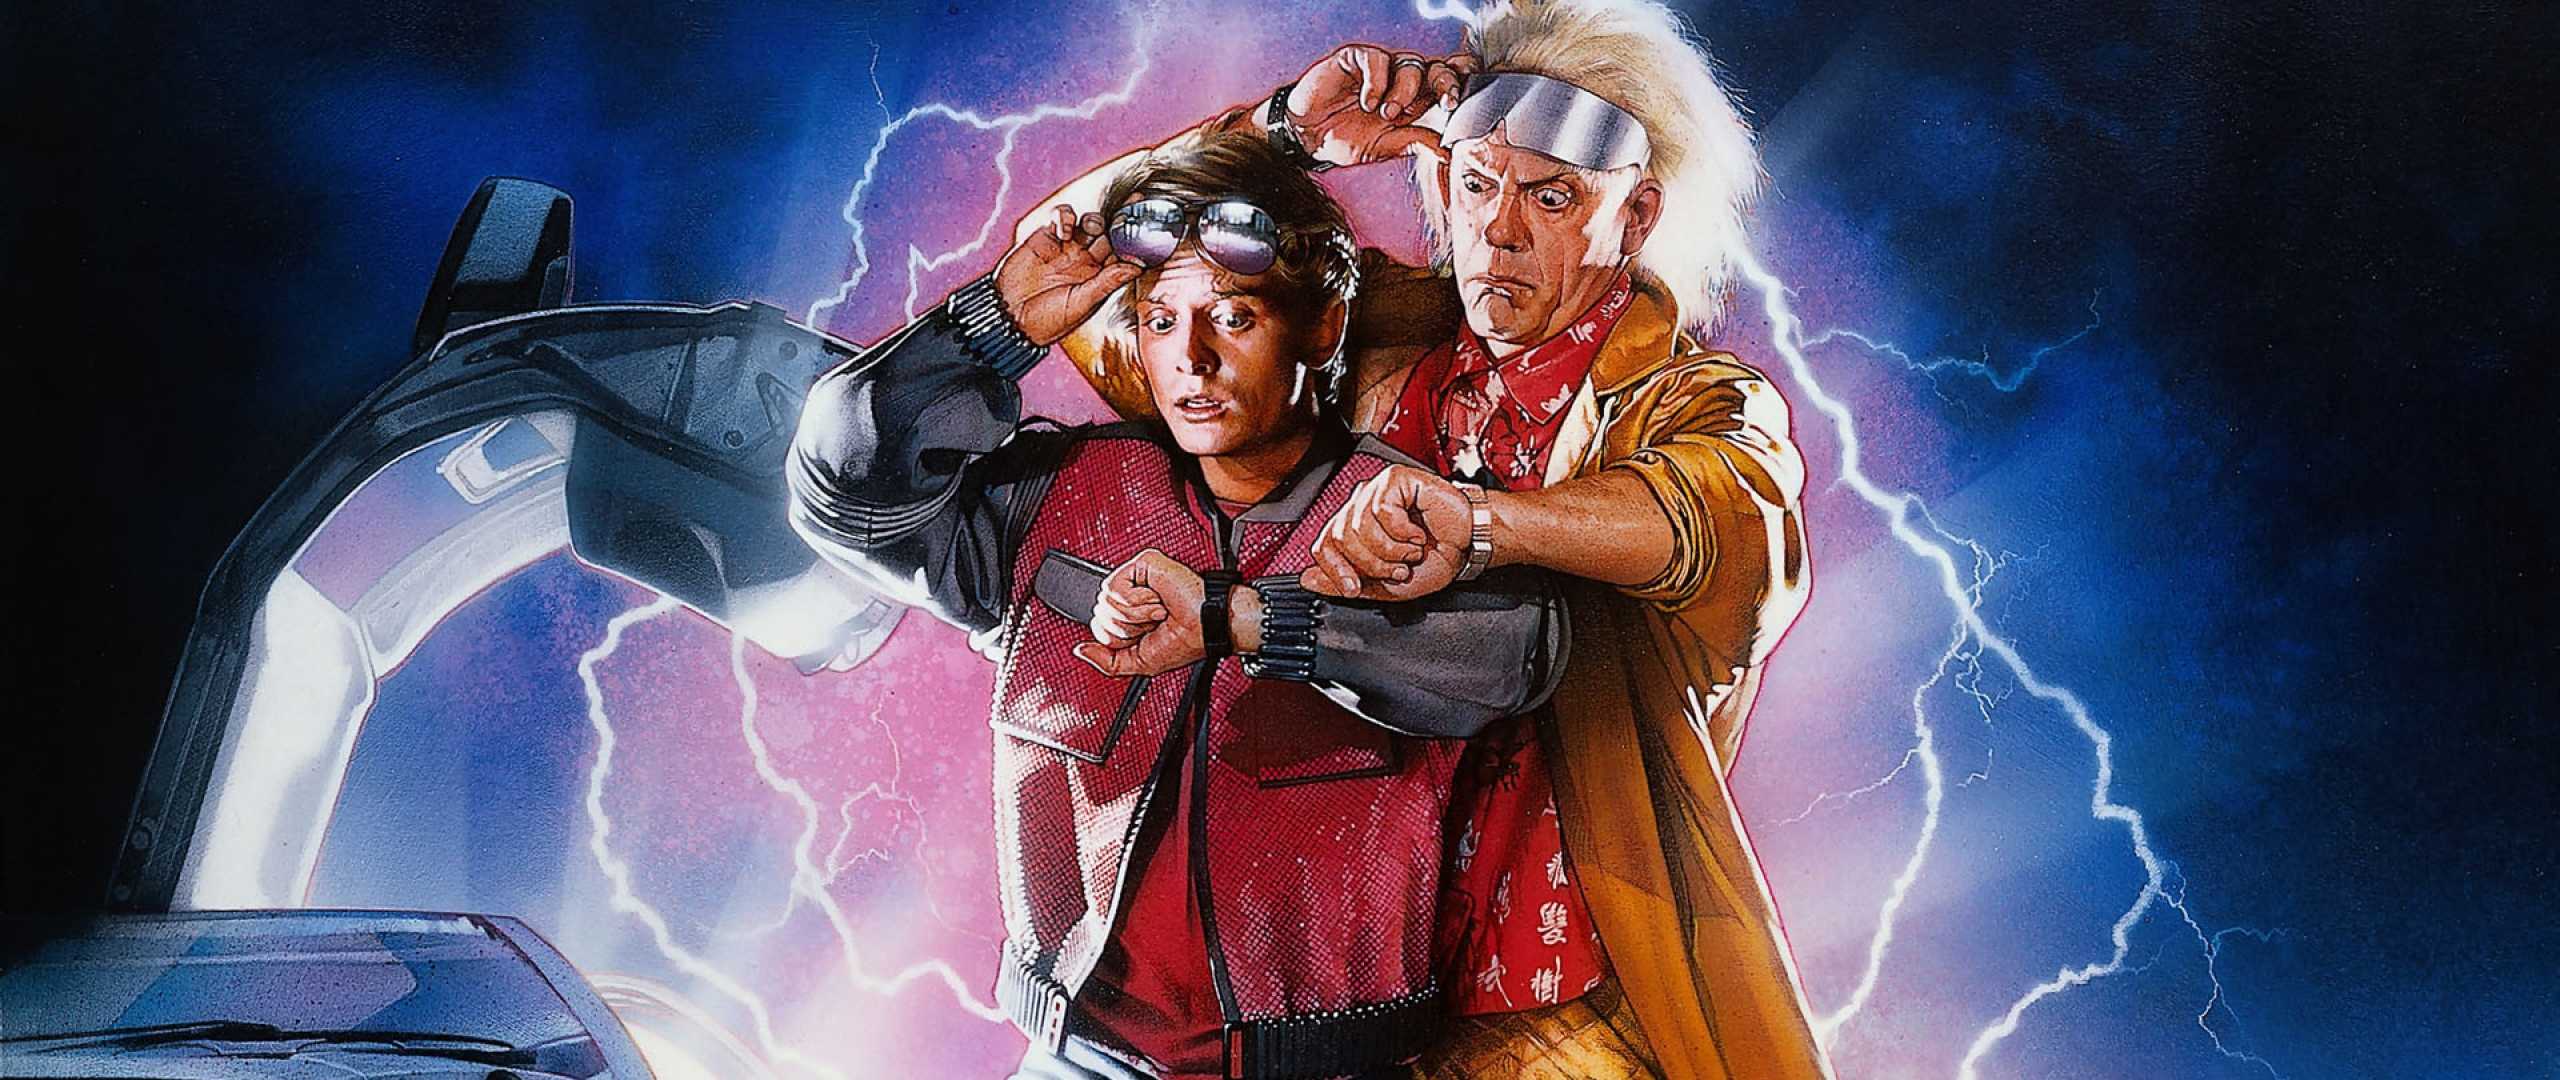 Back to the Future 1985 Phone Wallpaper  Movie Backgrounds  MovieWallpaper Backgrounds Future Movie Mov  Future car Back to the  future Future wallpaper